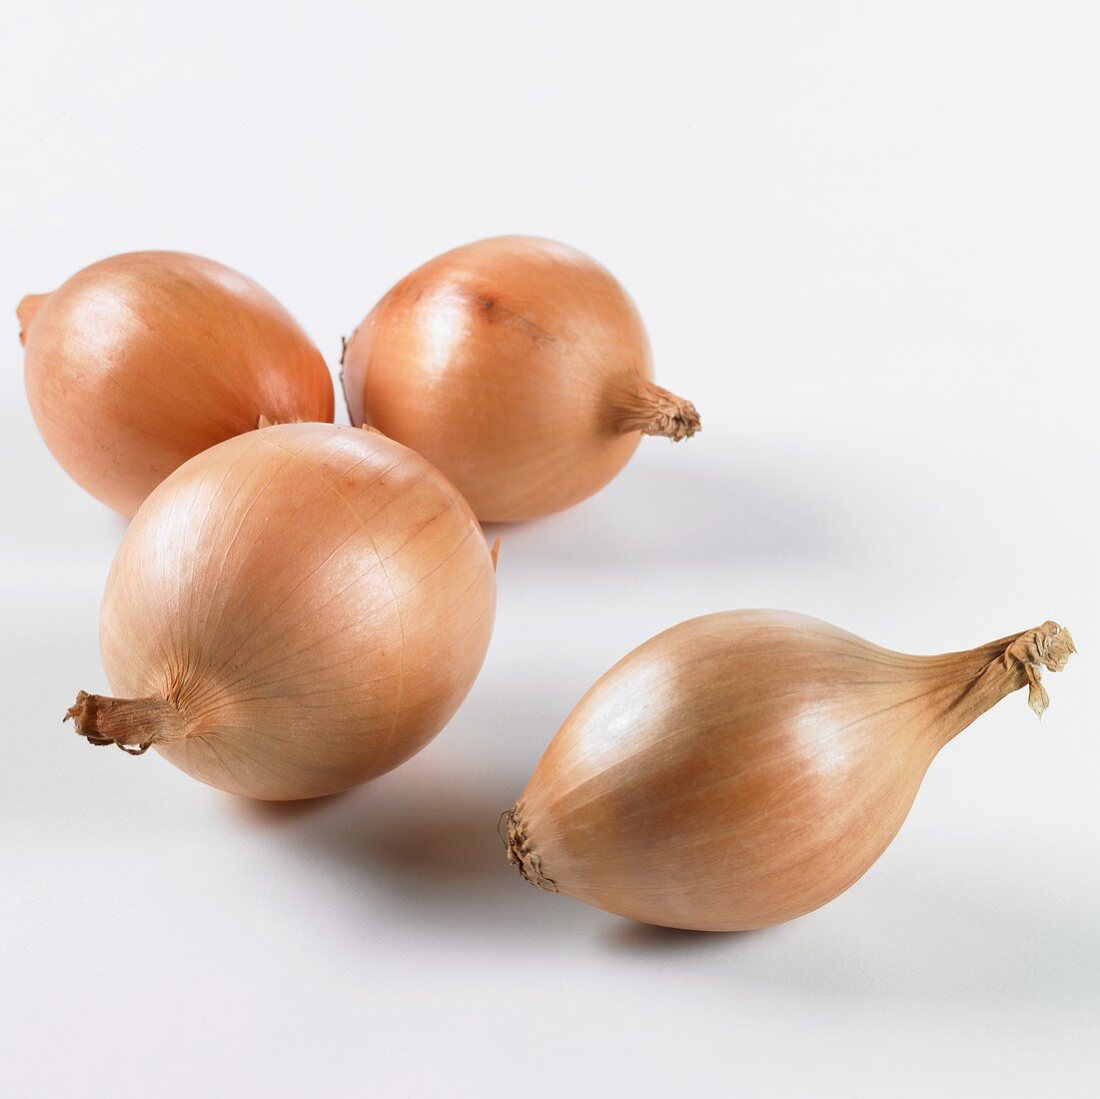 Four onions